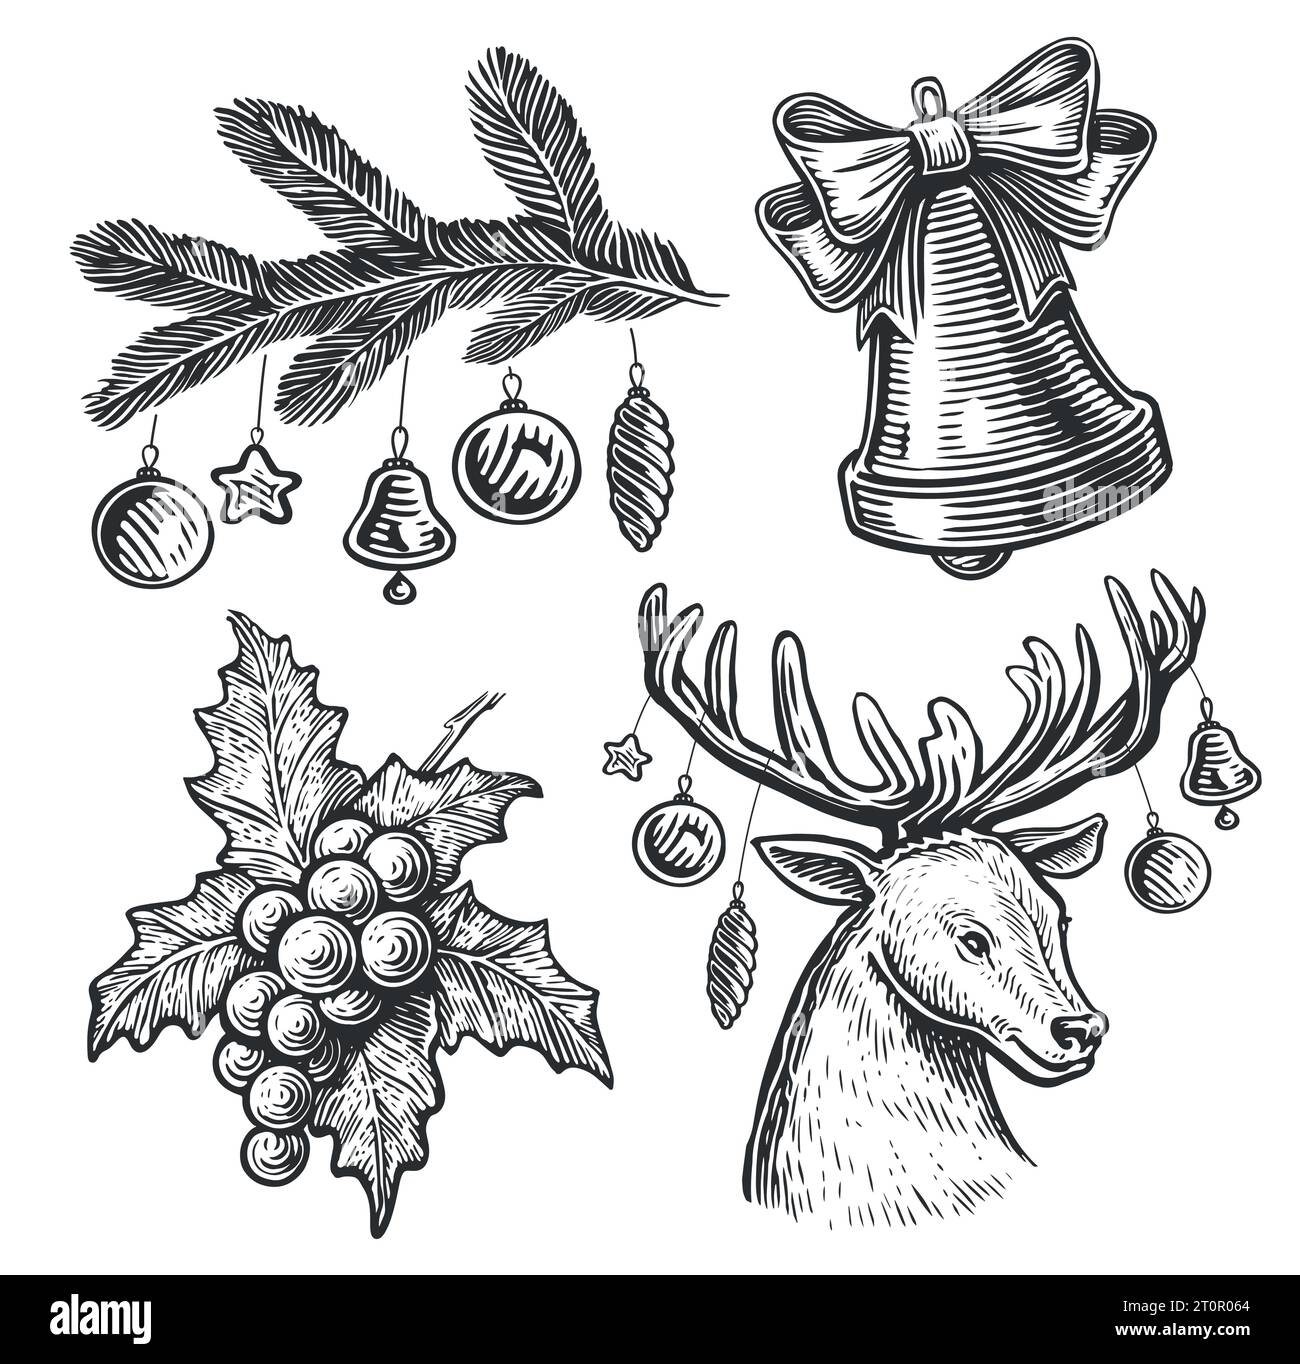 Christmas set vintage sketch vector illustrations engraving style Stock ...